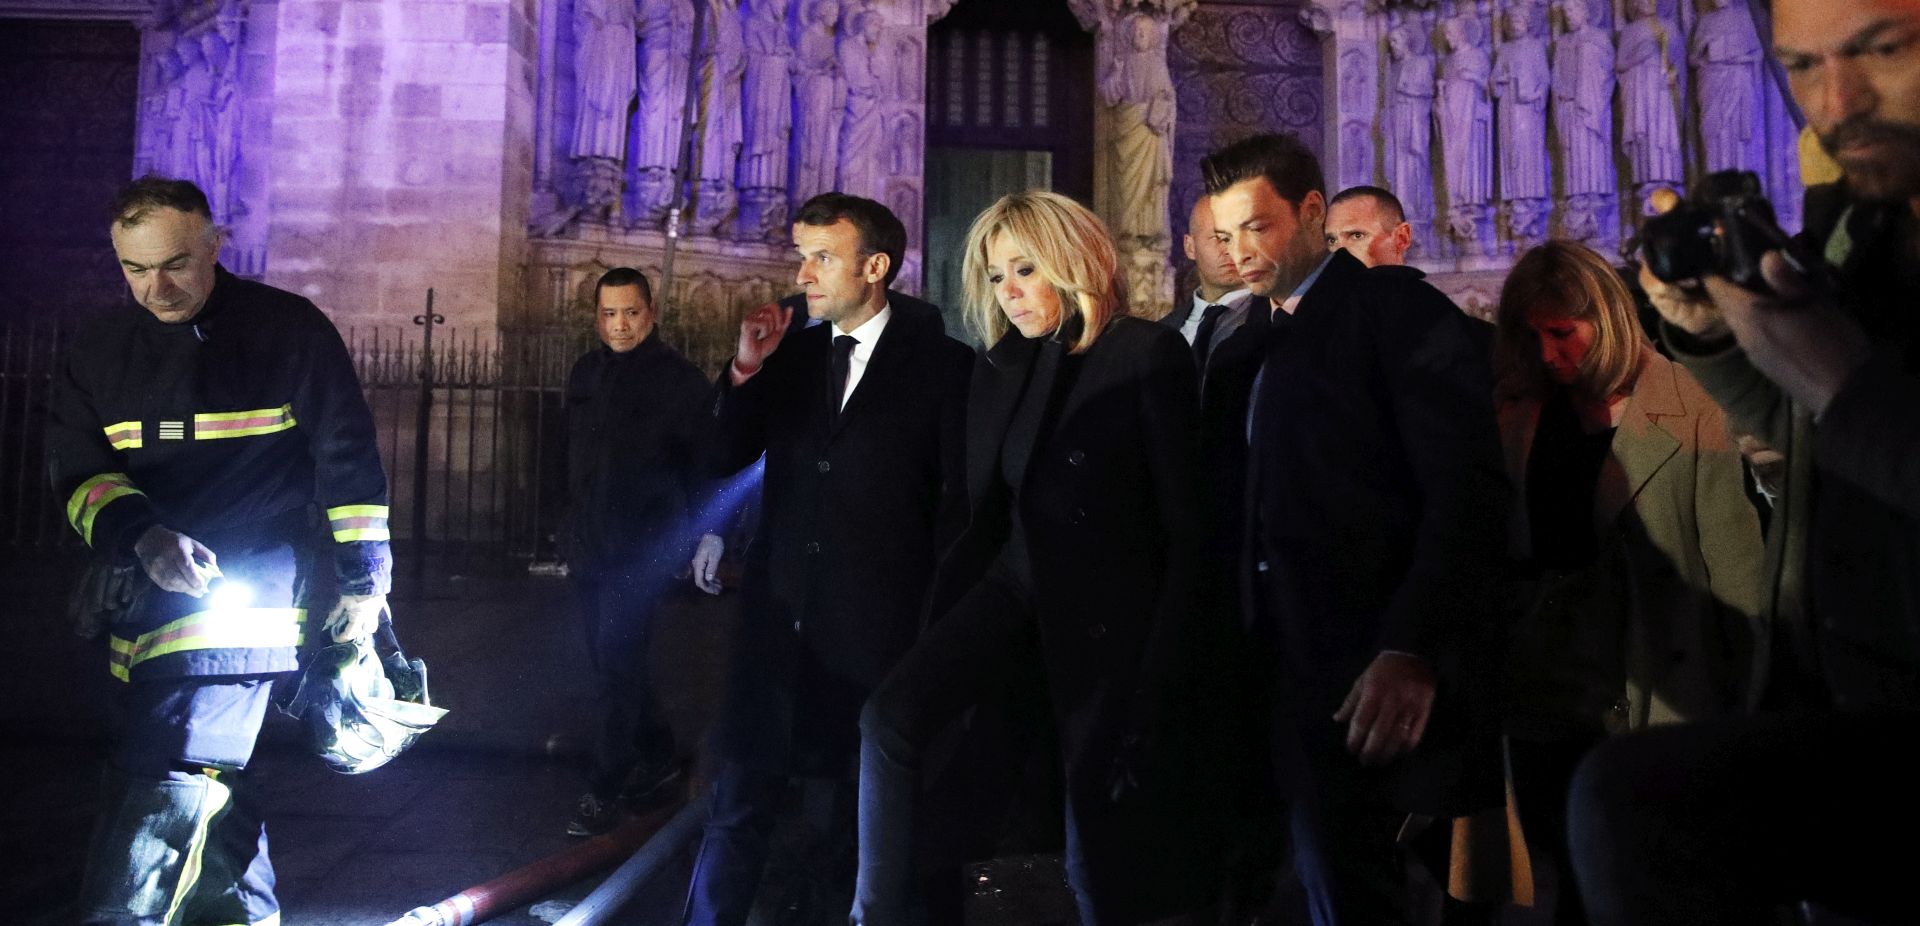 epa07509136 French President Emmanuel Macron (C) and his wife Brigitte Macron (R) pay a visit to firemen fighting against a fire burning the roof of the Notre-Dame cathedral in Paris, France, 15 April 2019. A fire started in the late afternoon in one of the most visited monuments of the French capital.  EPA/YOAN VALAT